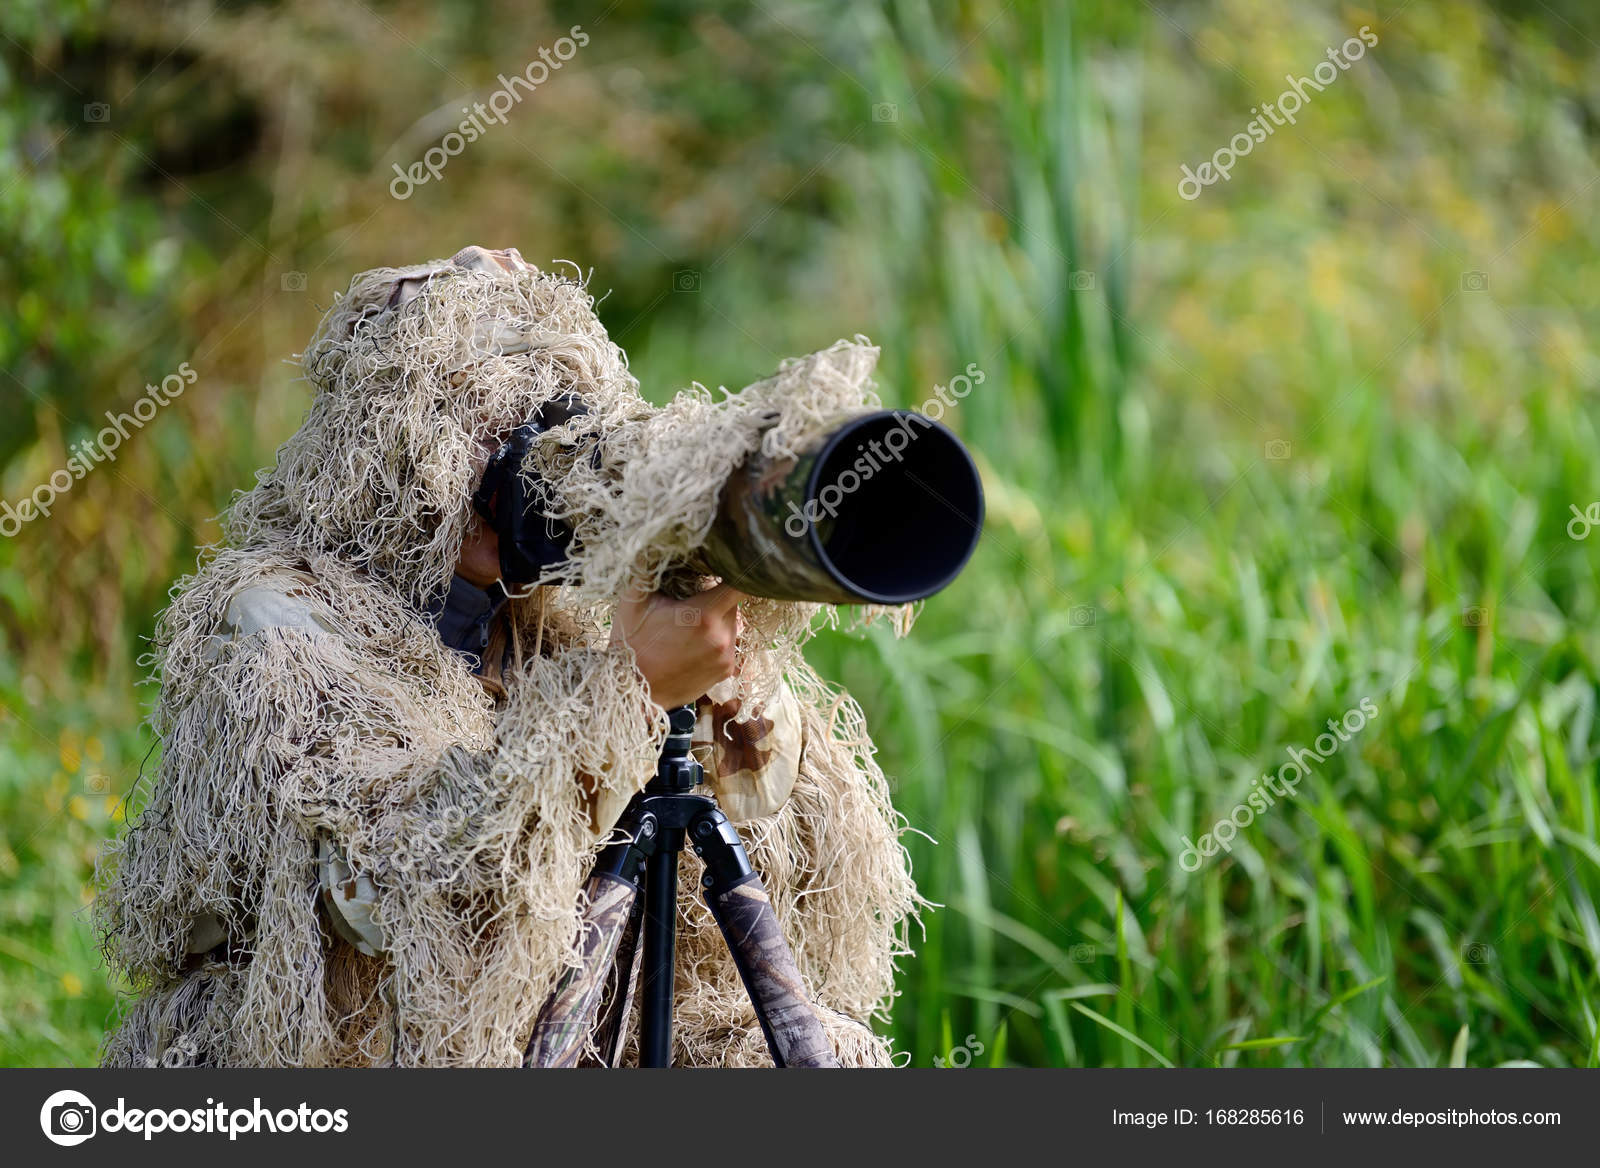 Sniper in camouflage suit looking at the target - Stock Image - Everypixel